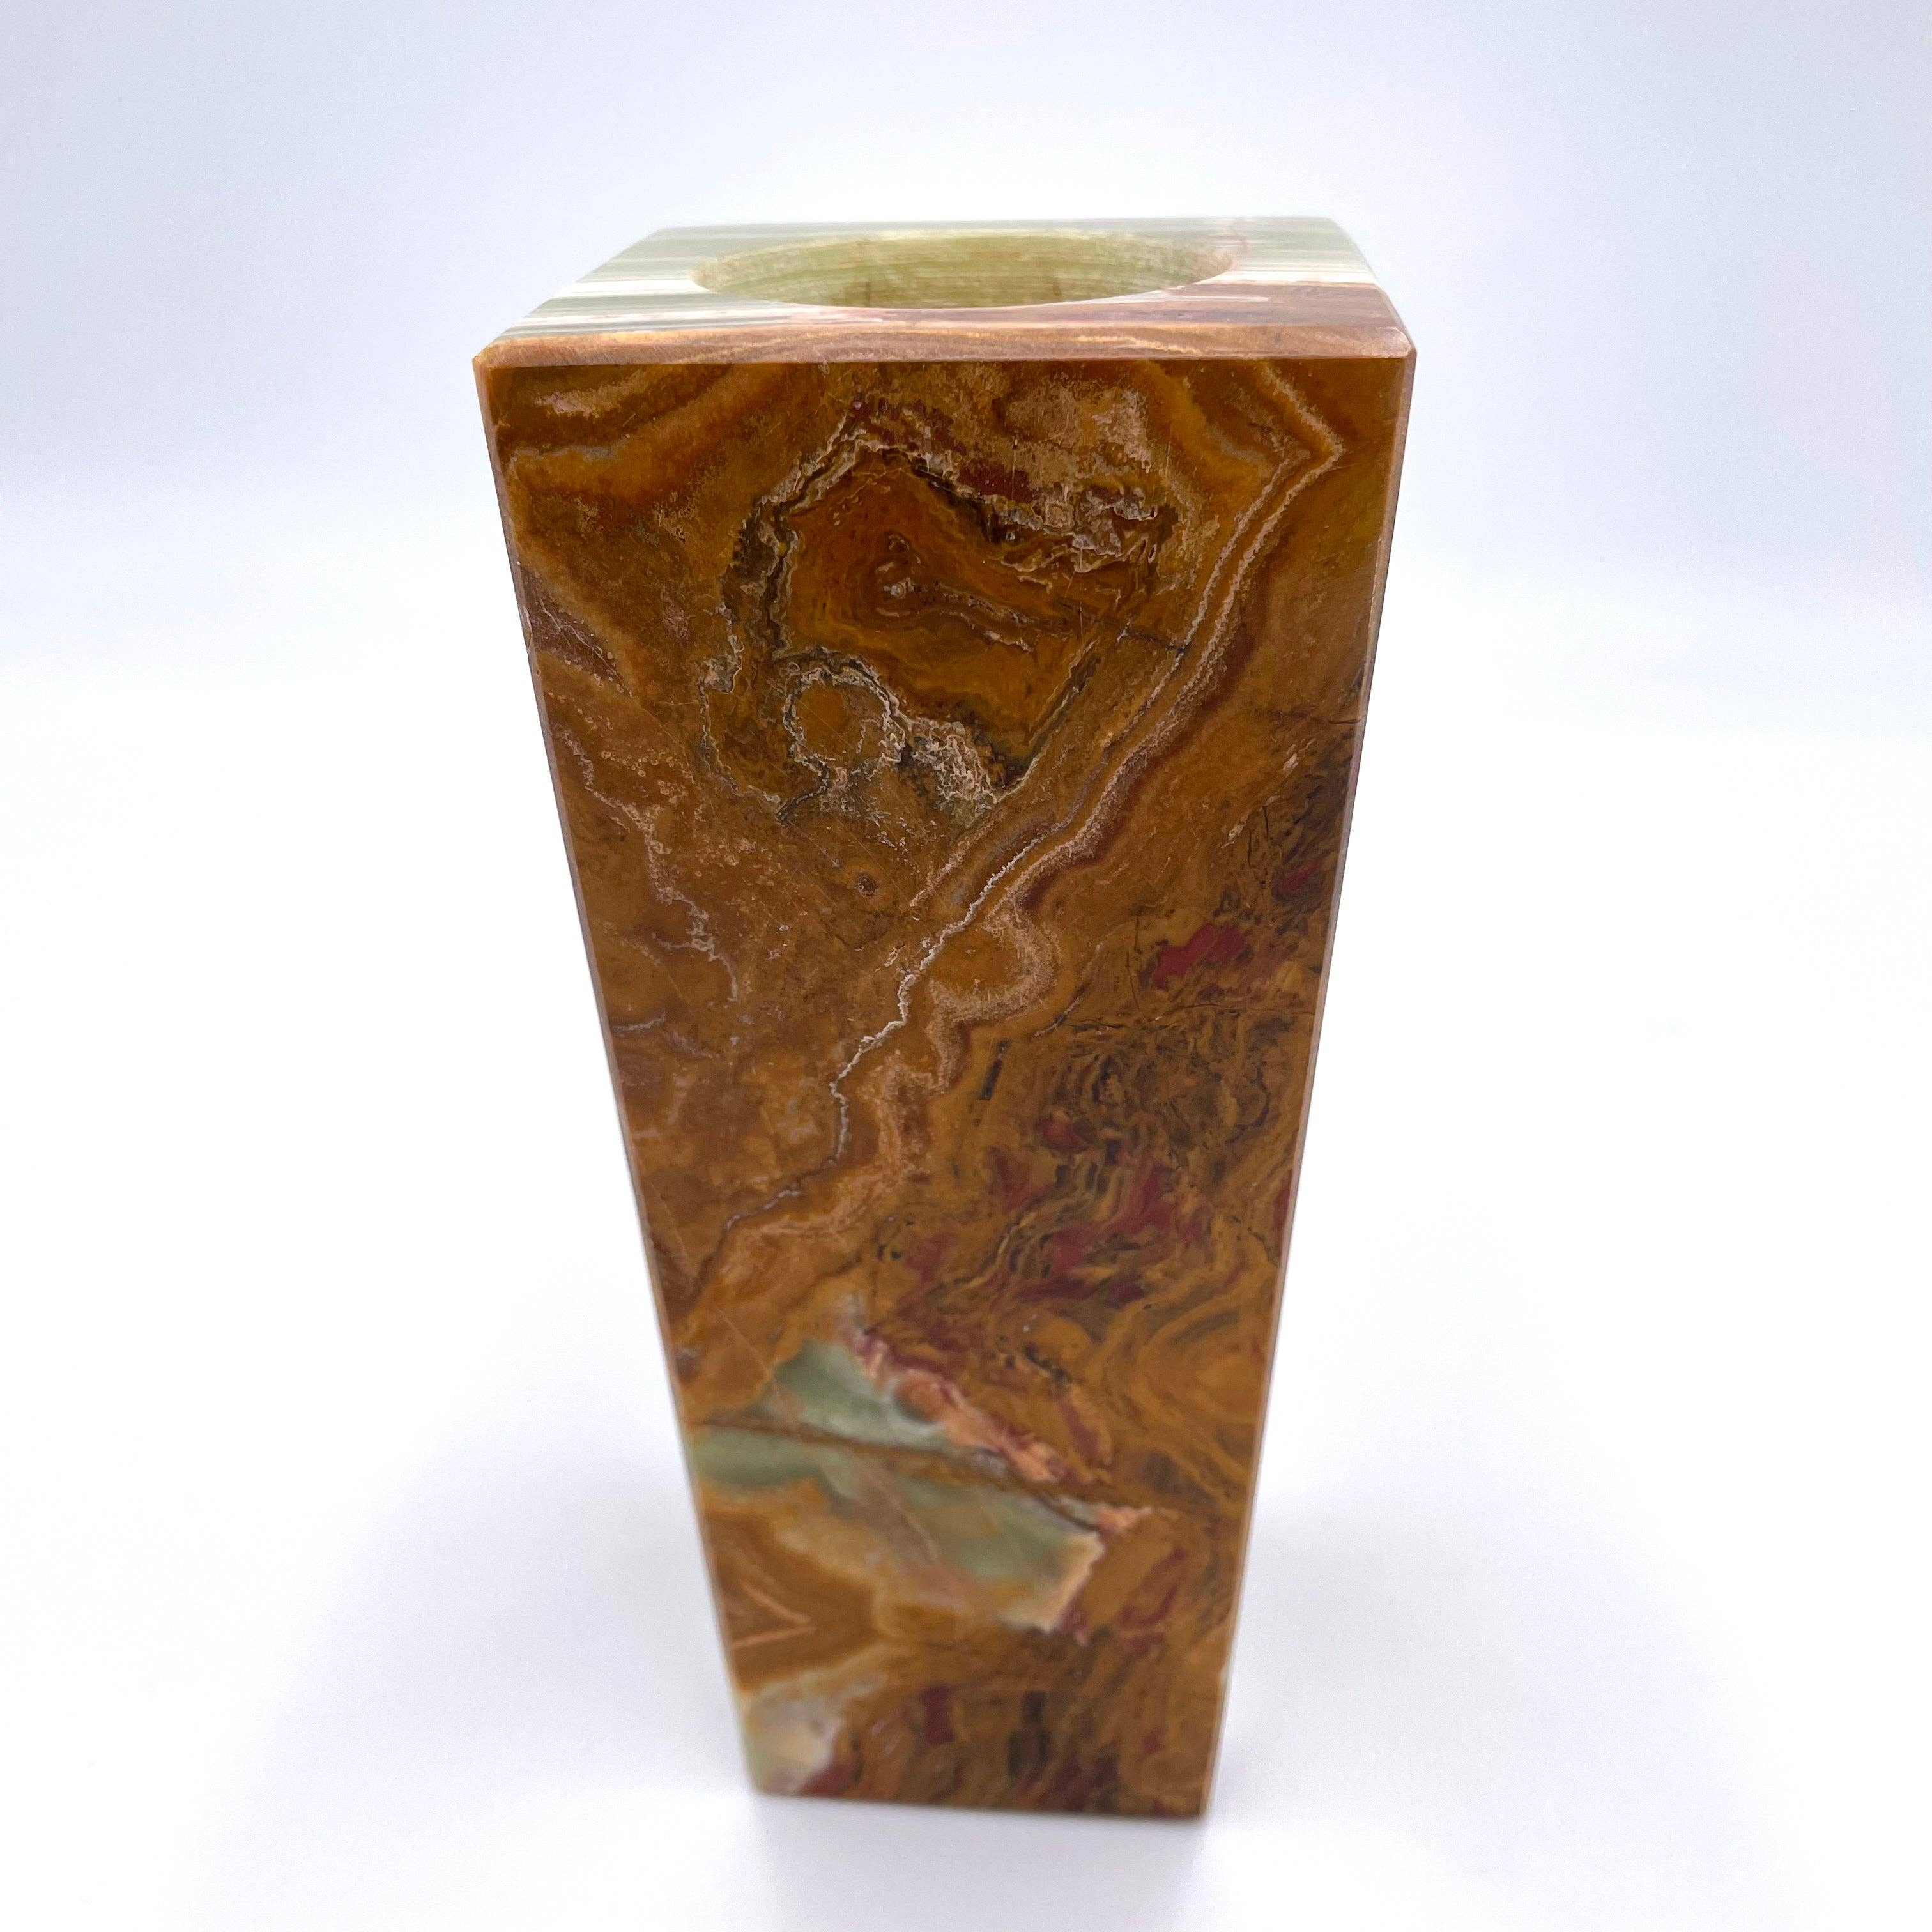 6" Square Vase - Marble and Onyx: Verona Marble